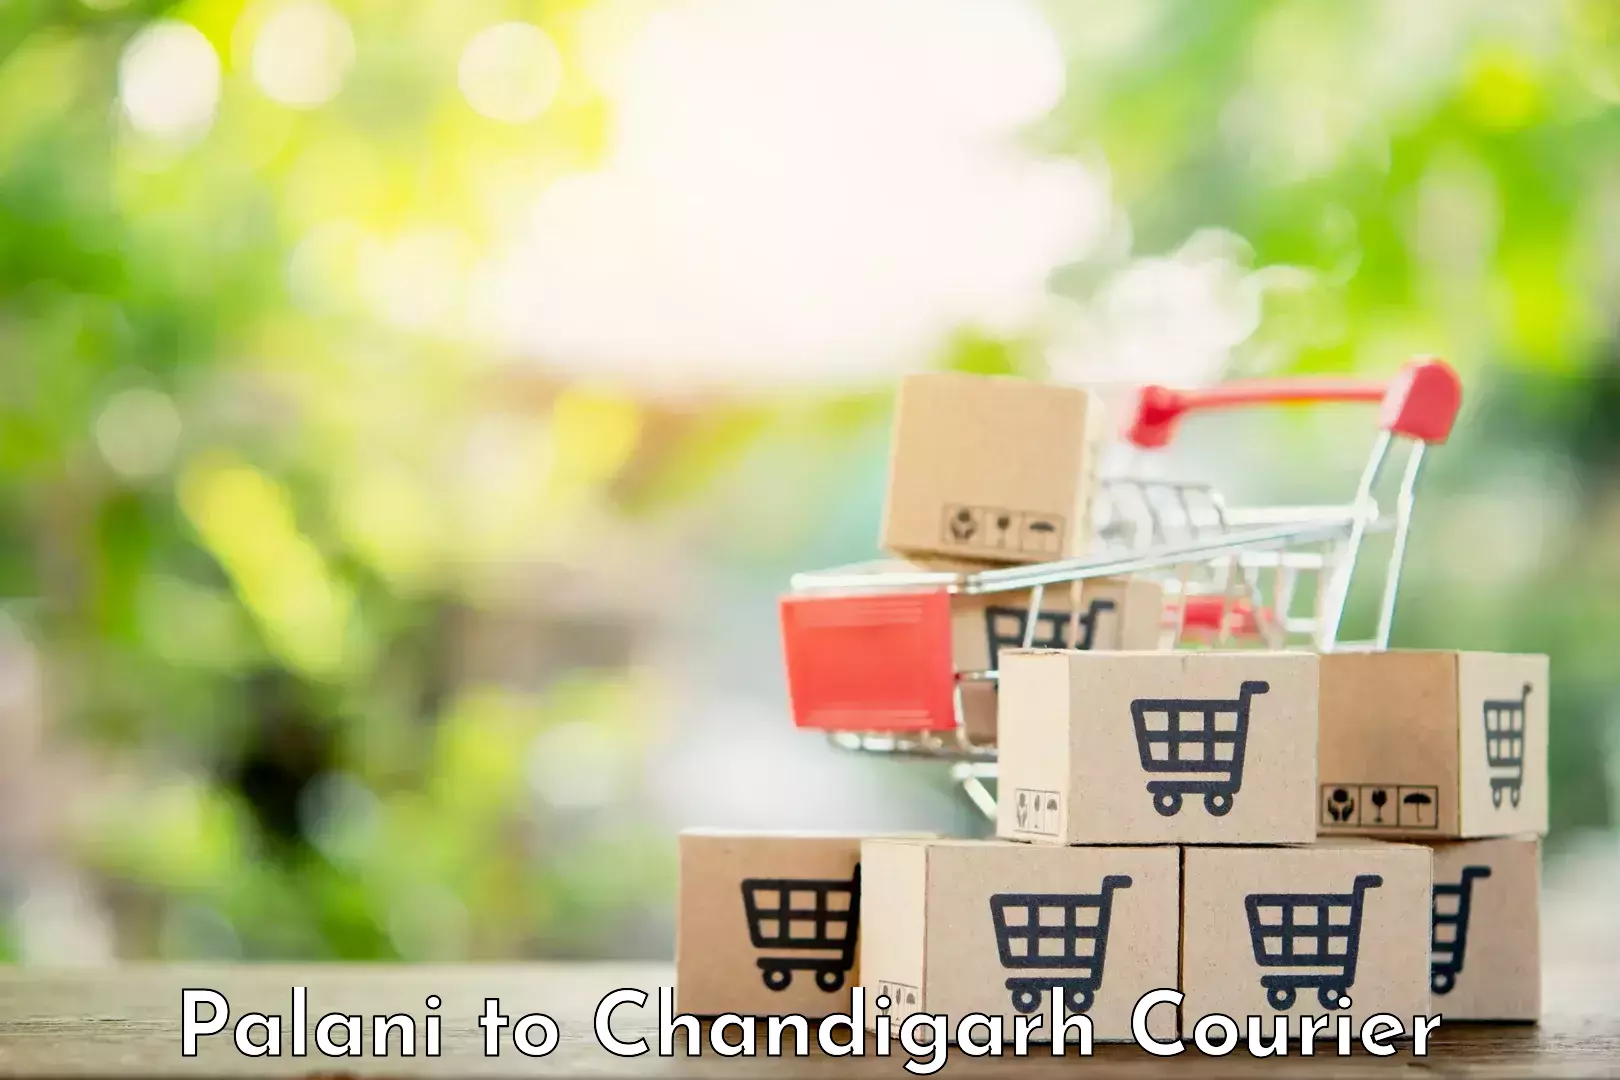 Courier service innovation Palani to Chandigarh